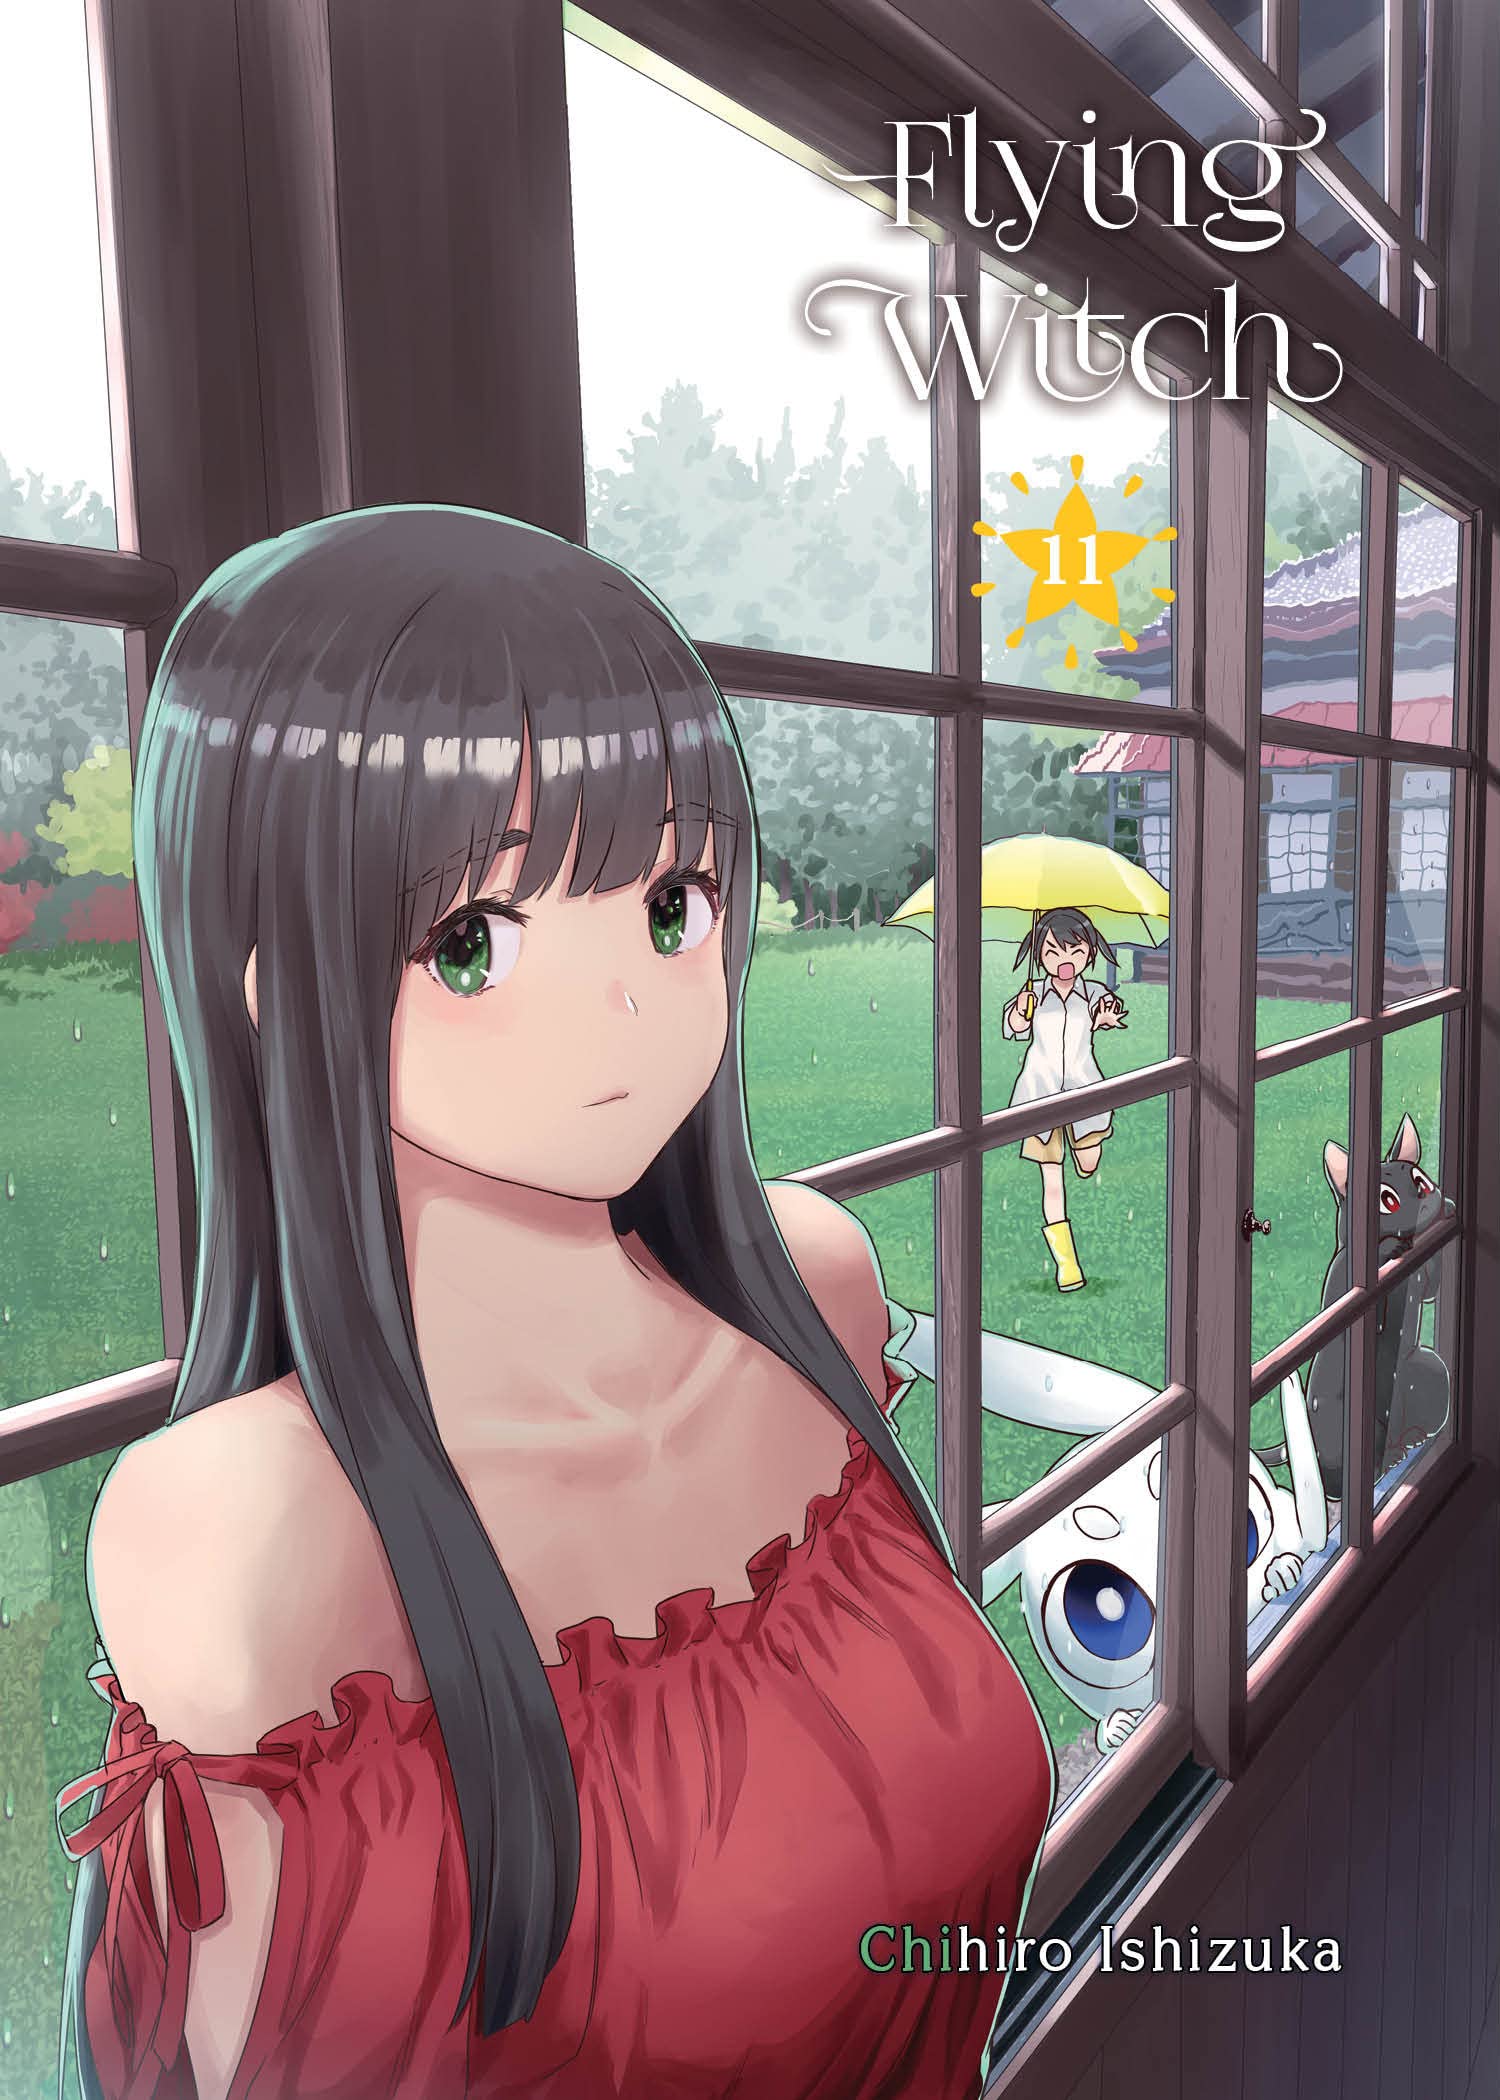 Flying Witch Vol. 11